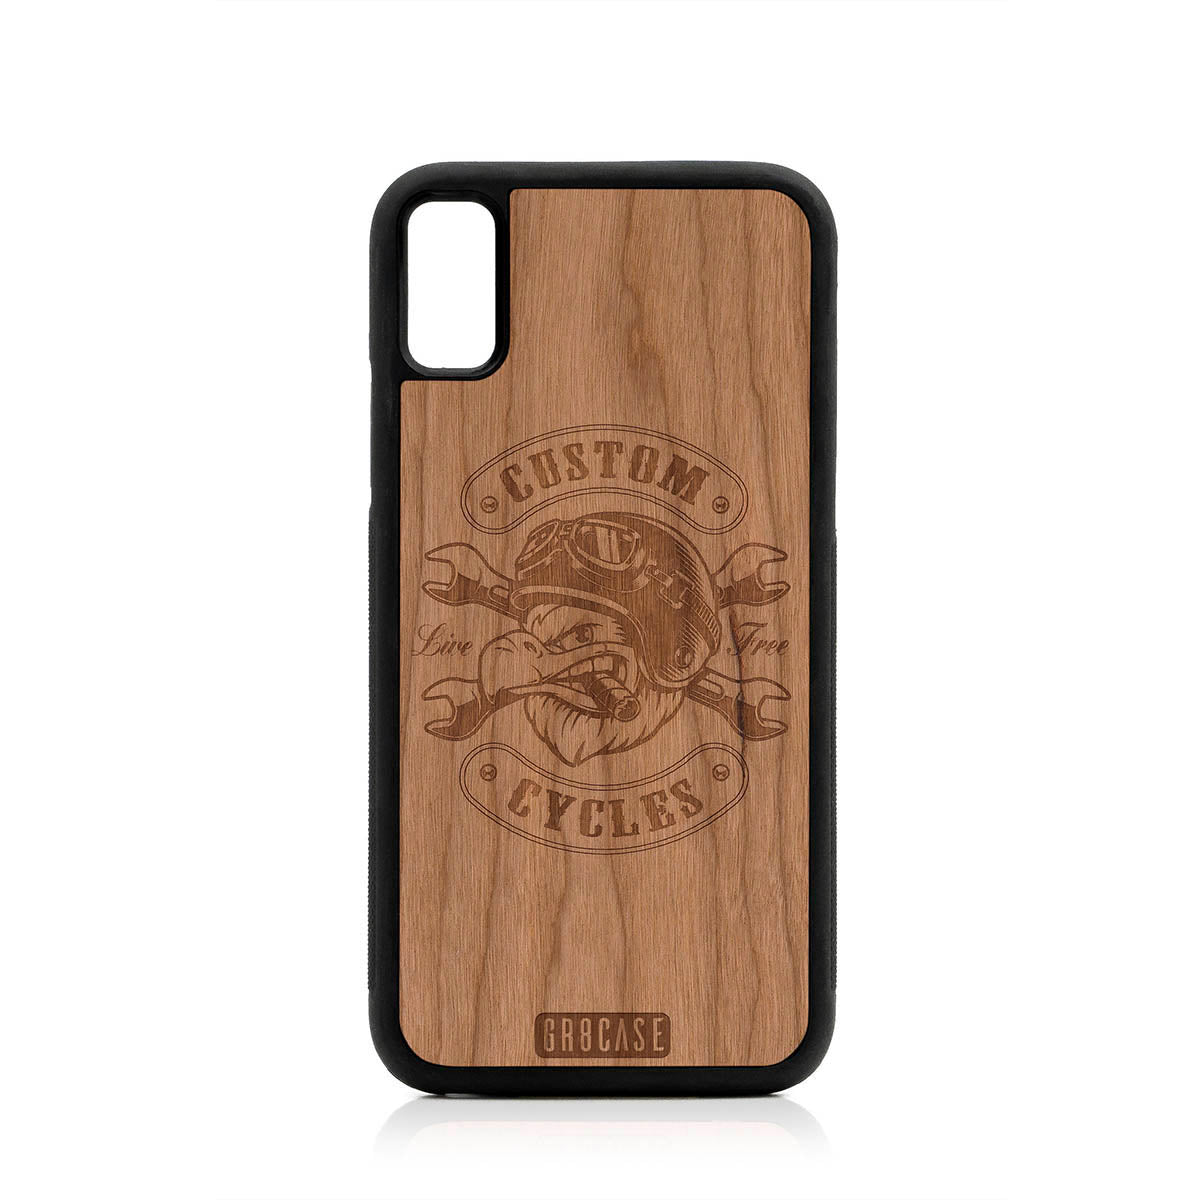 Custom Cycles Live Free (Biker Eagle) Design Wood Case For iPhone XR by GR8CASE